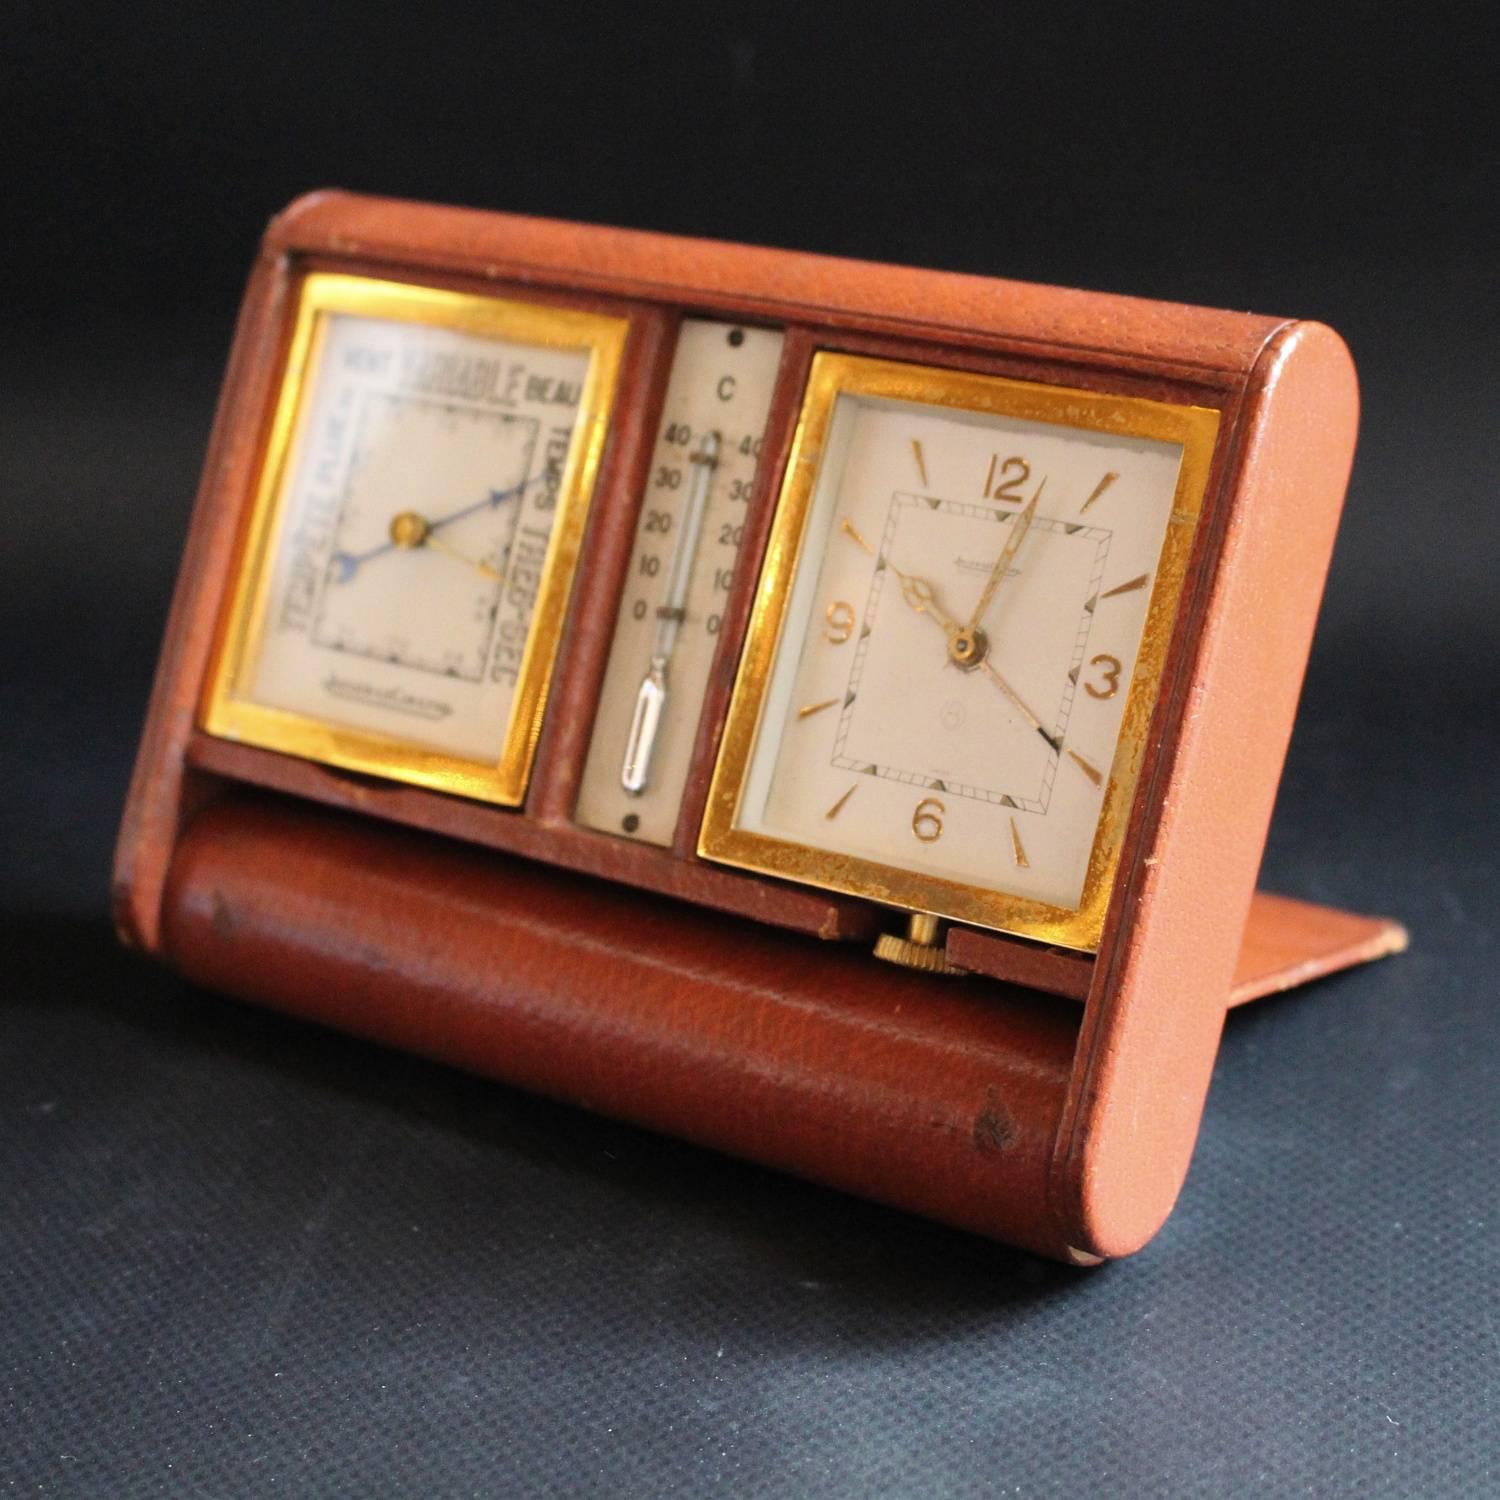 An Art Deco, Jaeger-LeCoultre travel compendium. Comprises 8 day movement clock, barometer and thermometer set in a pigskin folding case.

Measures: H 11cm, W 15cm, D 3cm closed, 10cm open.
  